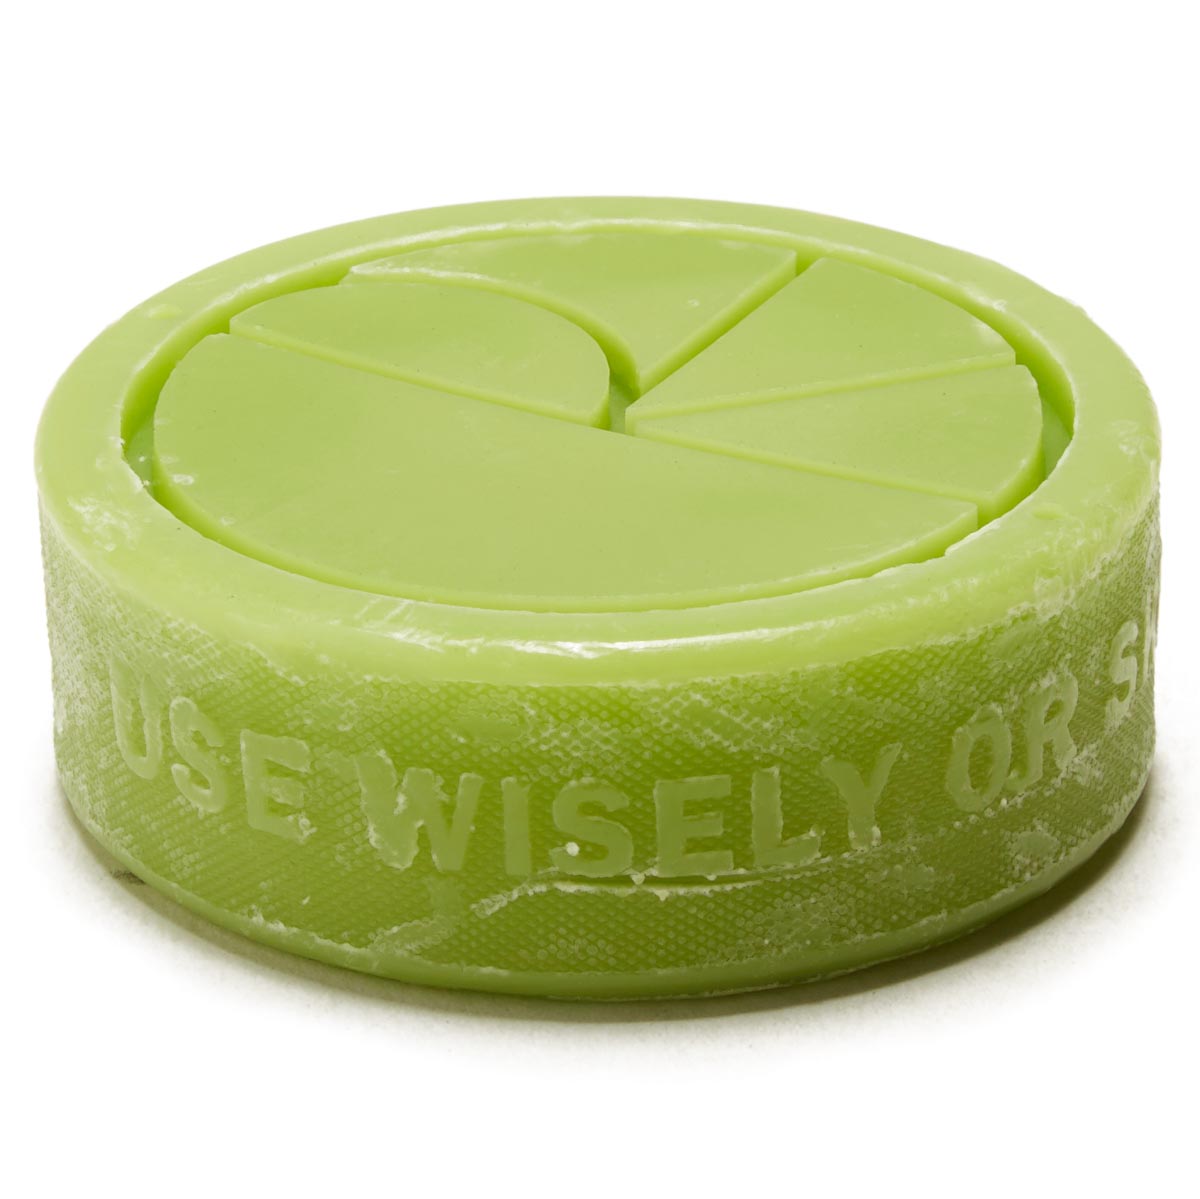 Polar Use Wisely or Skate Faster Skate Wax - Green image 2